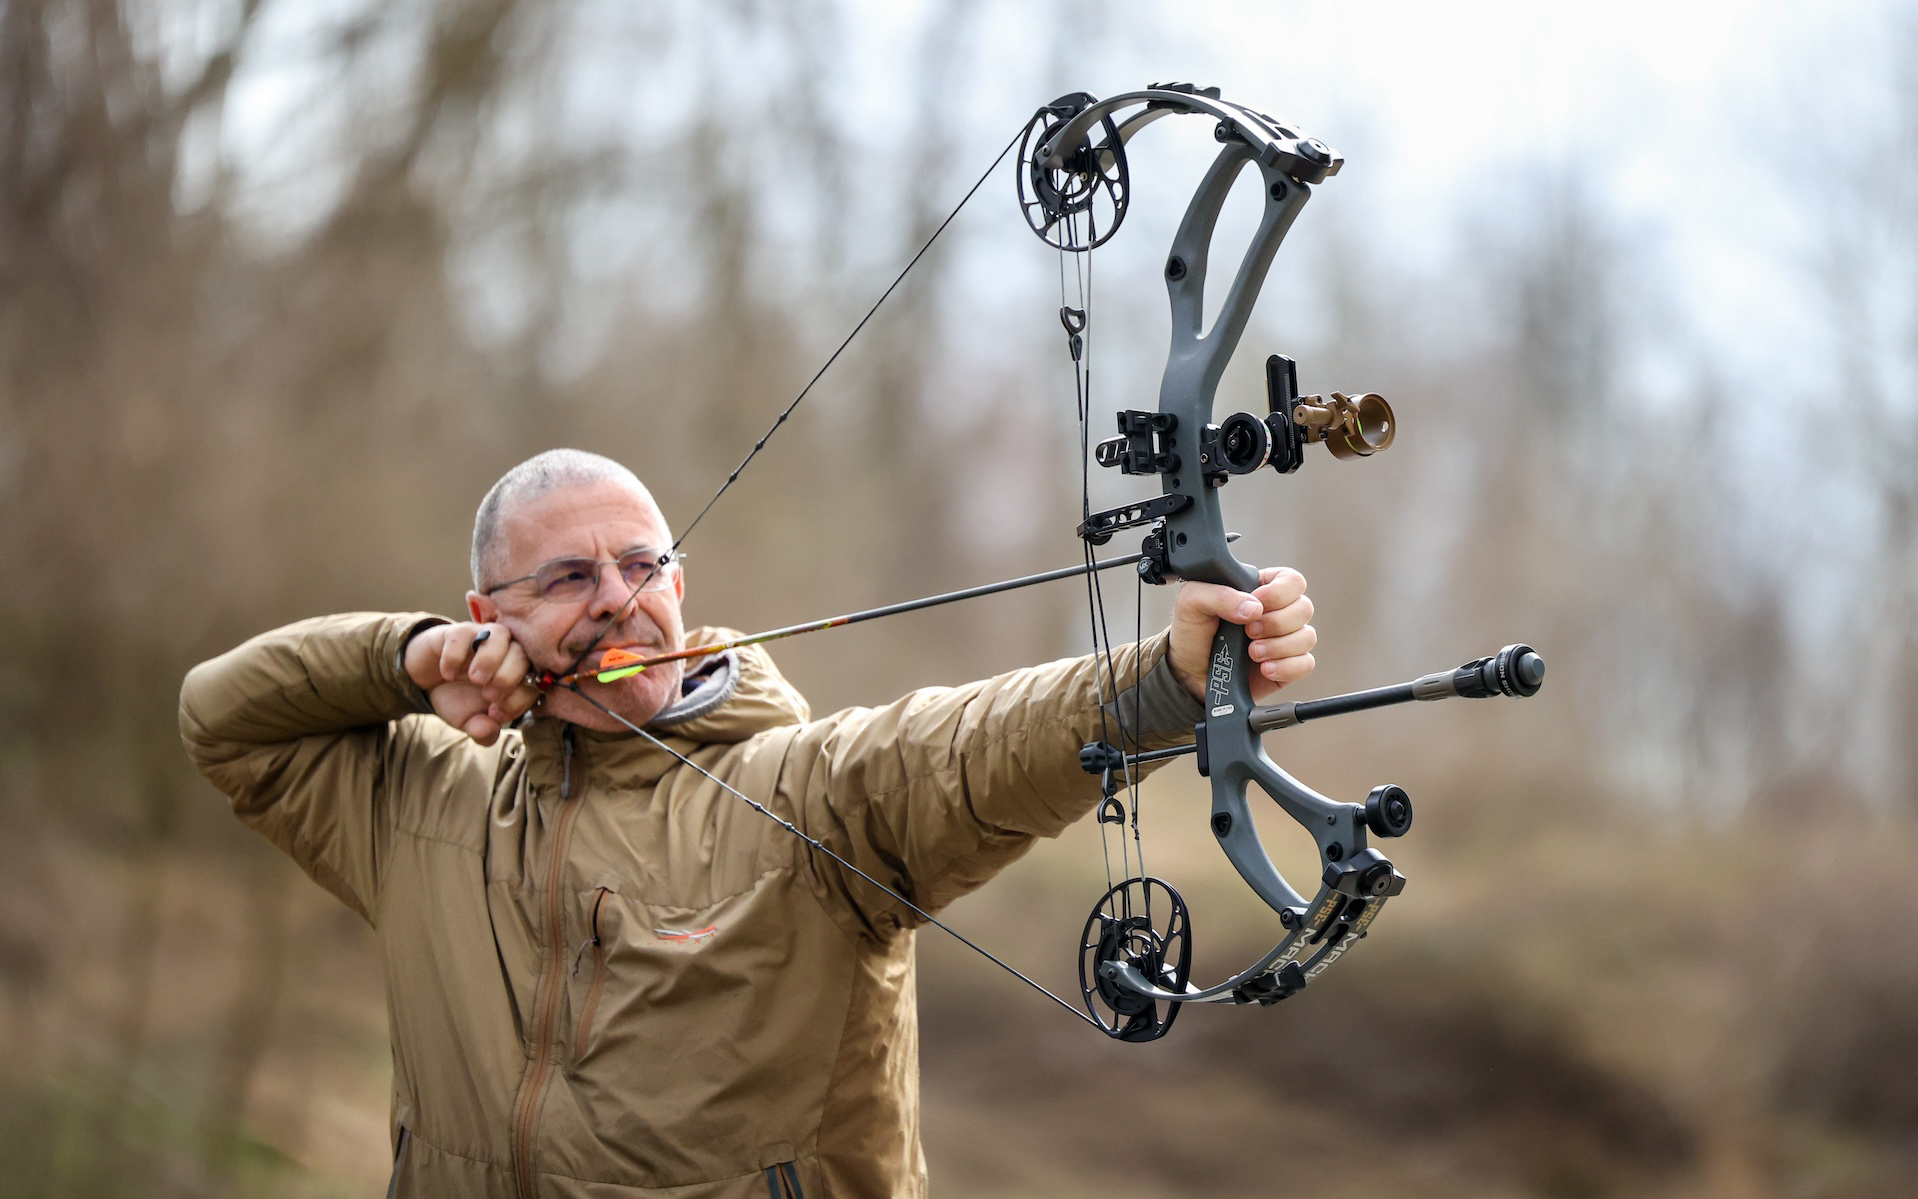 Bowhunter and archer PJ Reily holds the PSE Mach 30 compound bow at full draw.